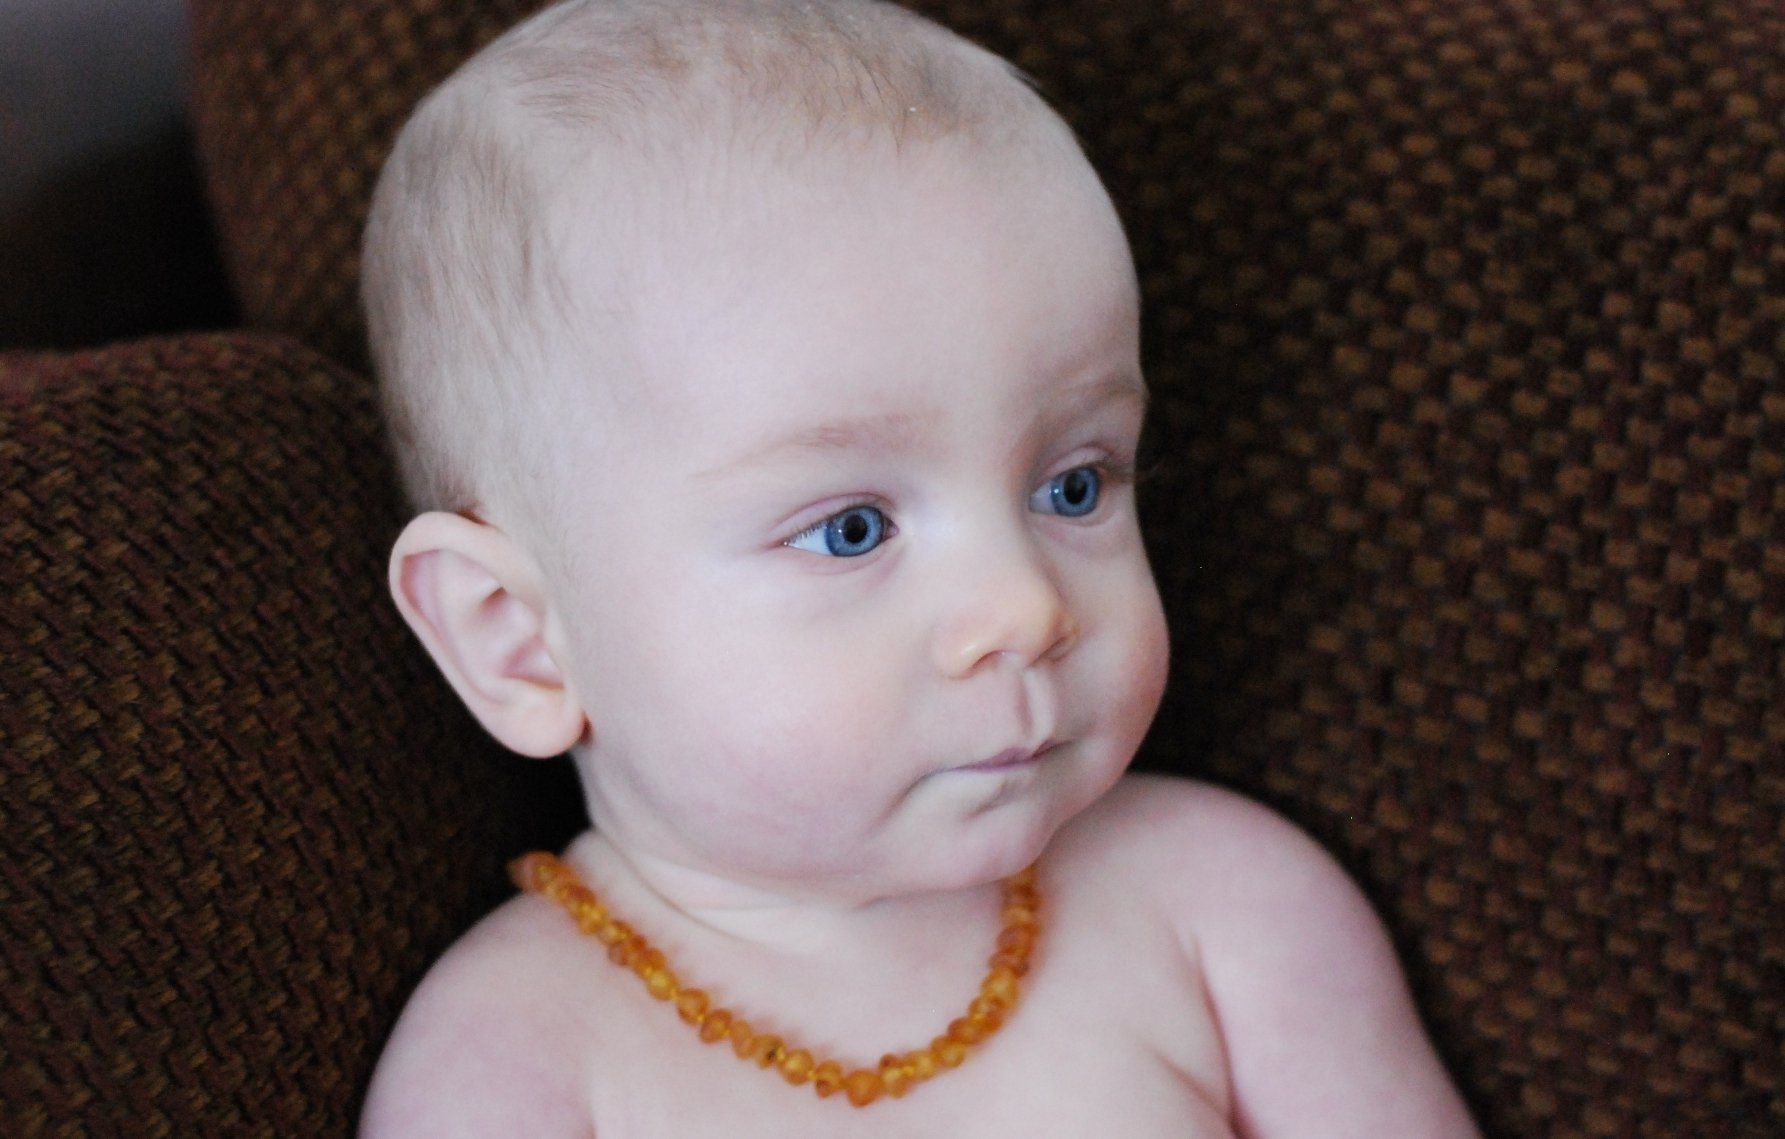 Raw Unpolished Baltic Amber Teething Necklace 12.5" - Golden Honey Colored